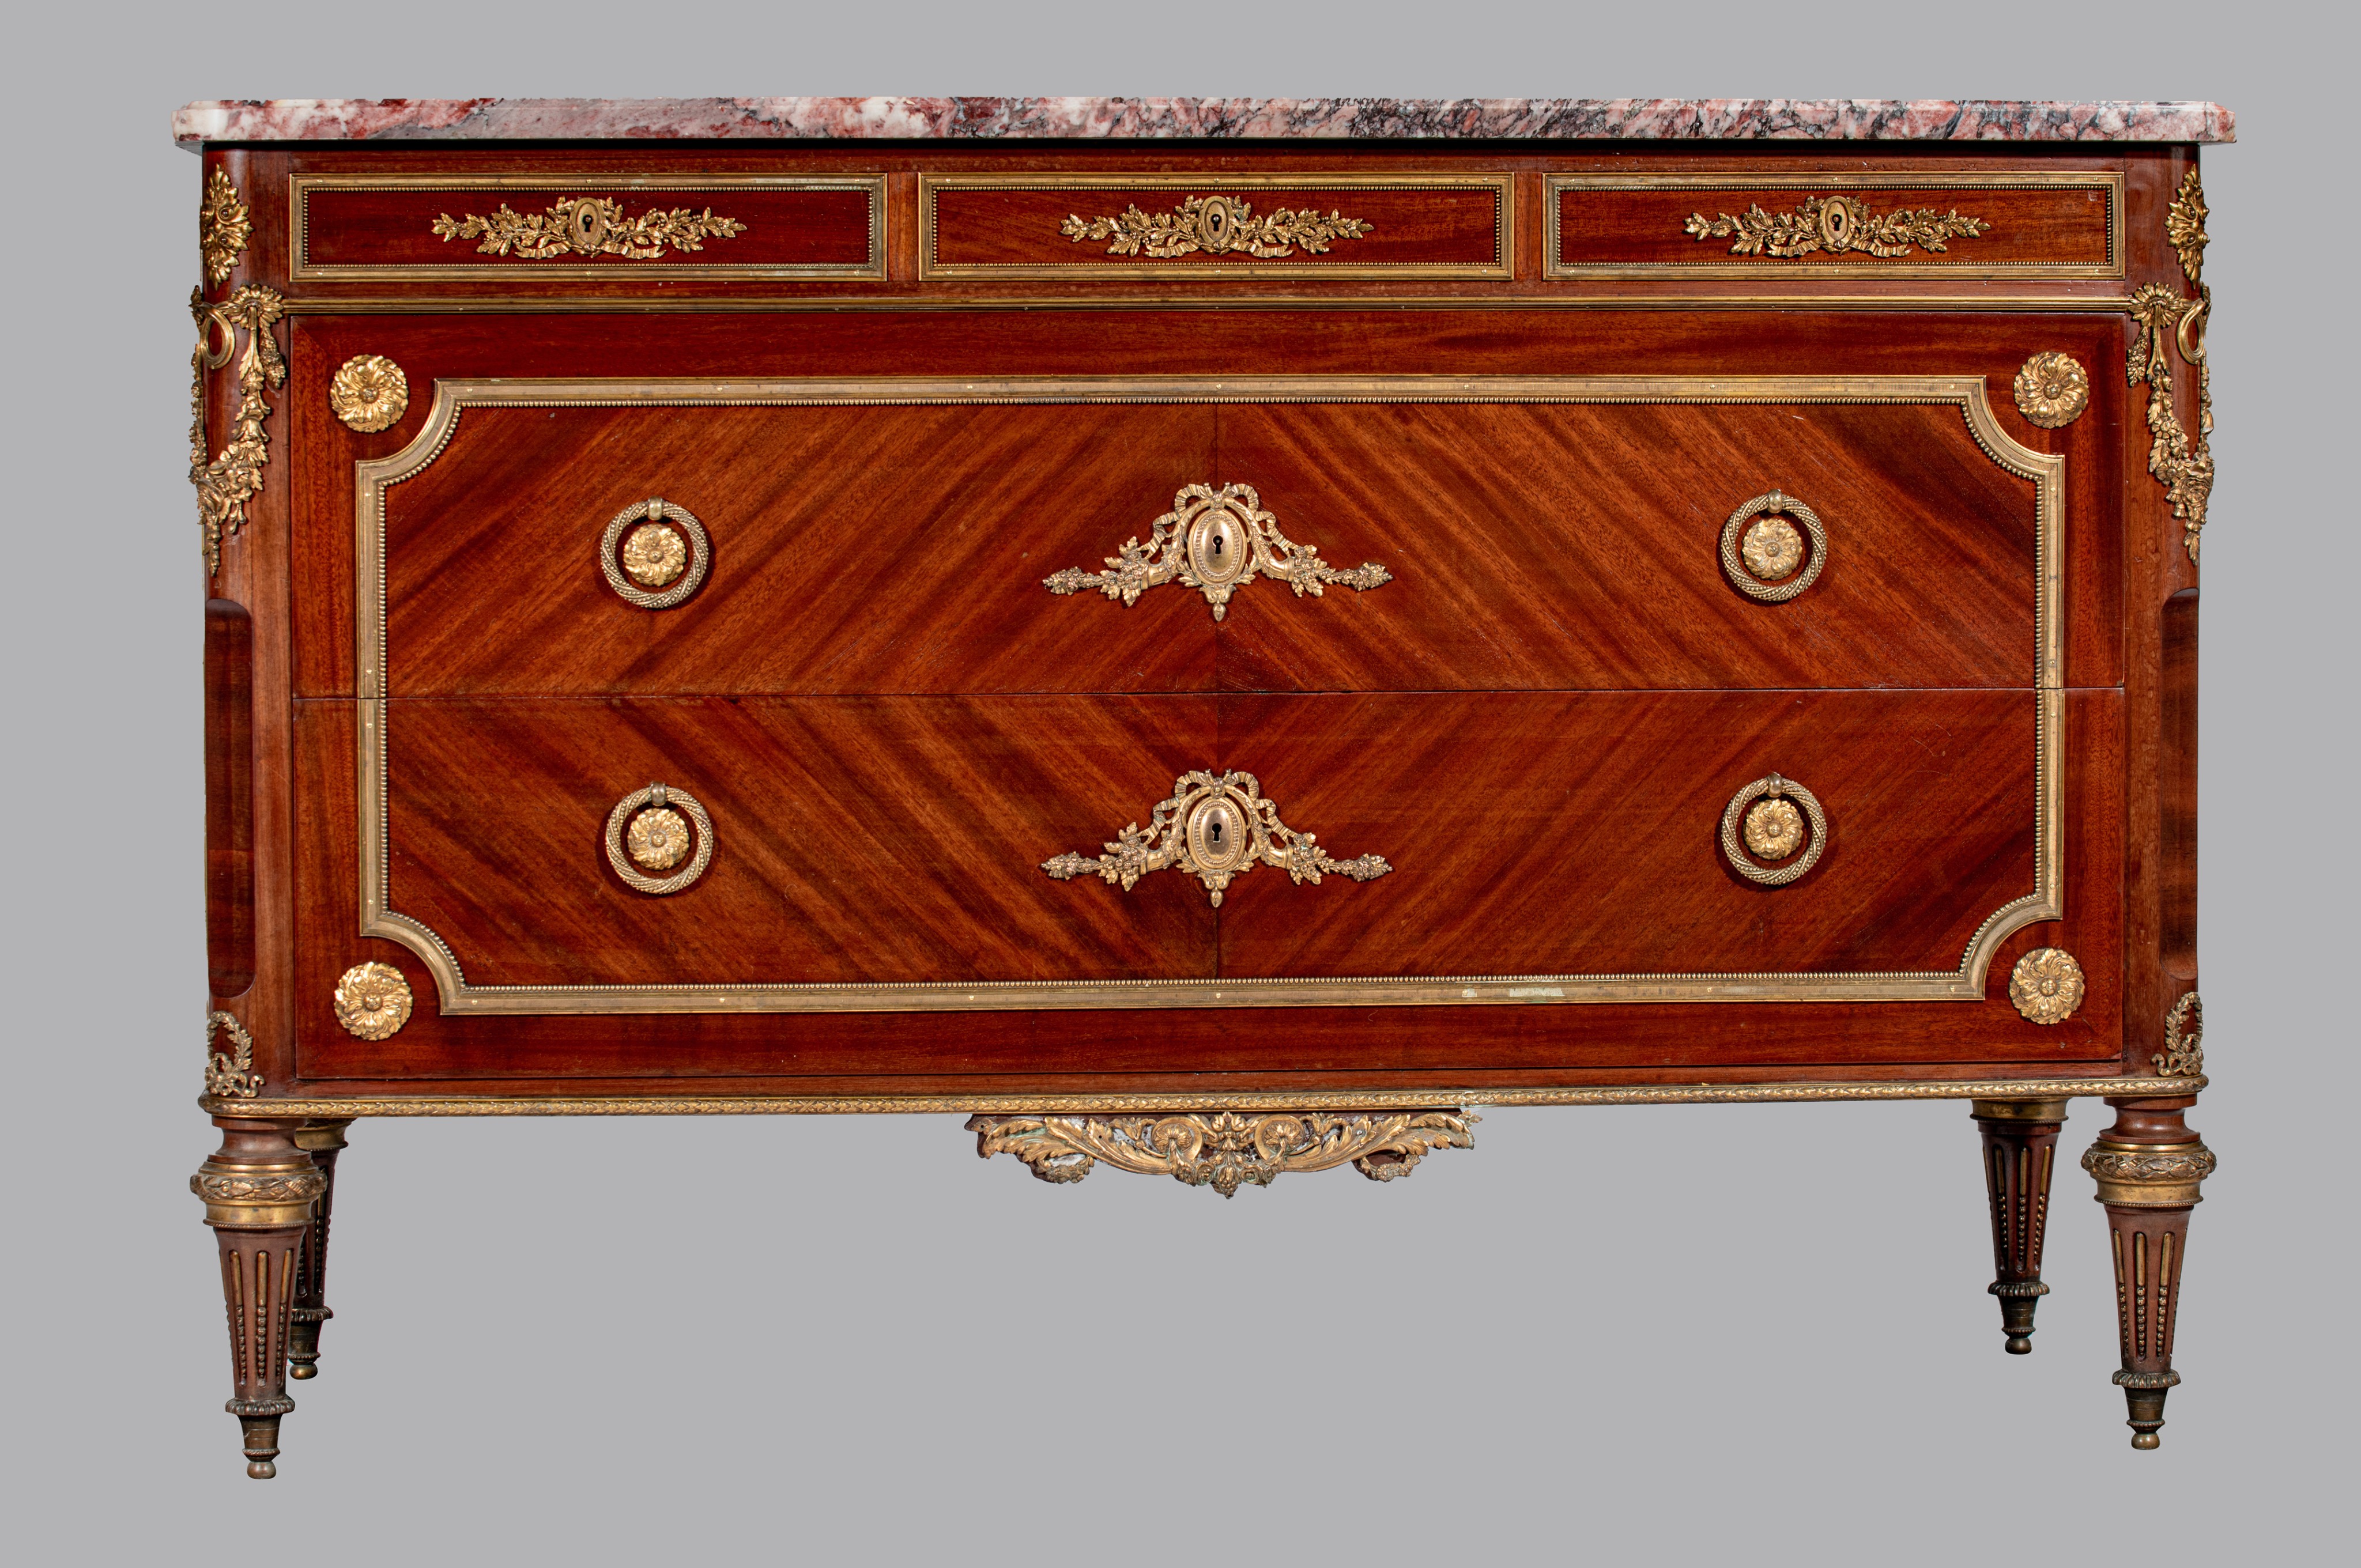 A Louis XVI style mahogany veneered commode with gilt brass mounts and marble top, H 89 - W 134 - D - Image 3 of 8